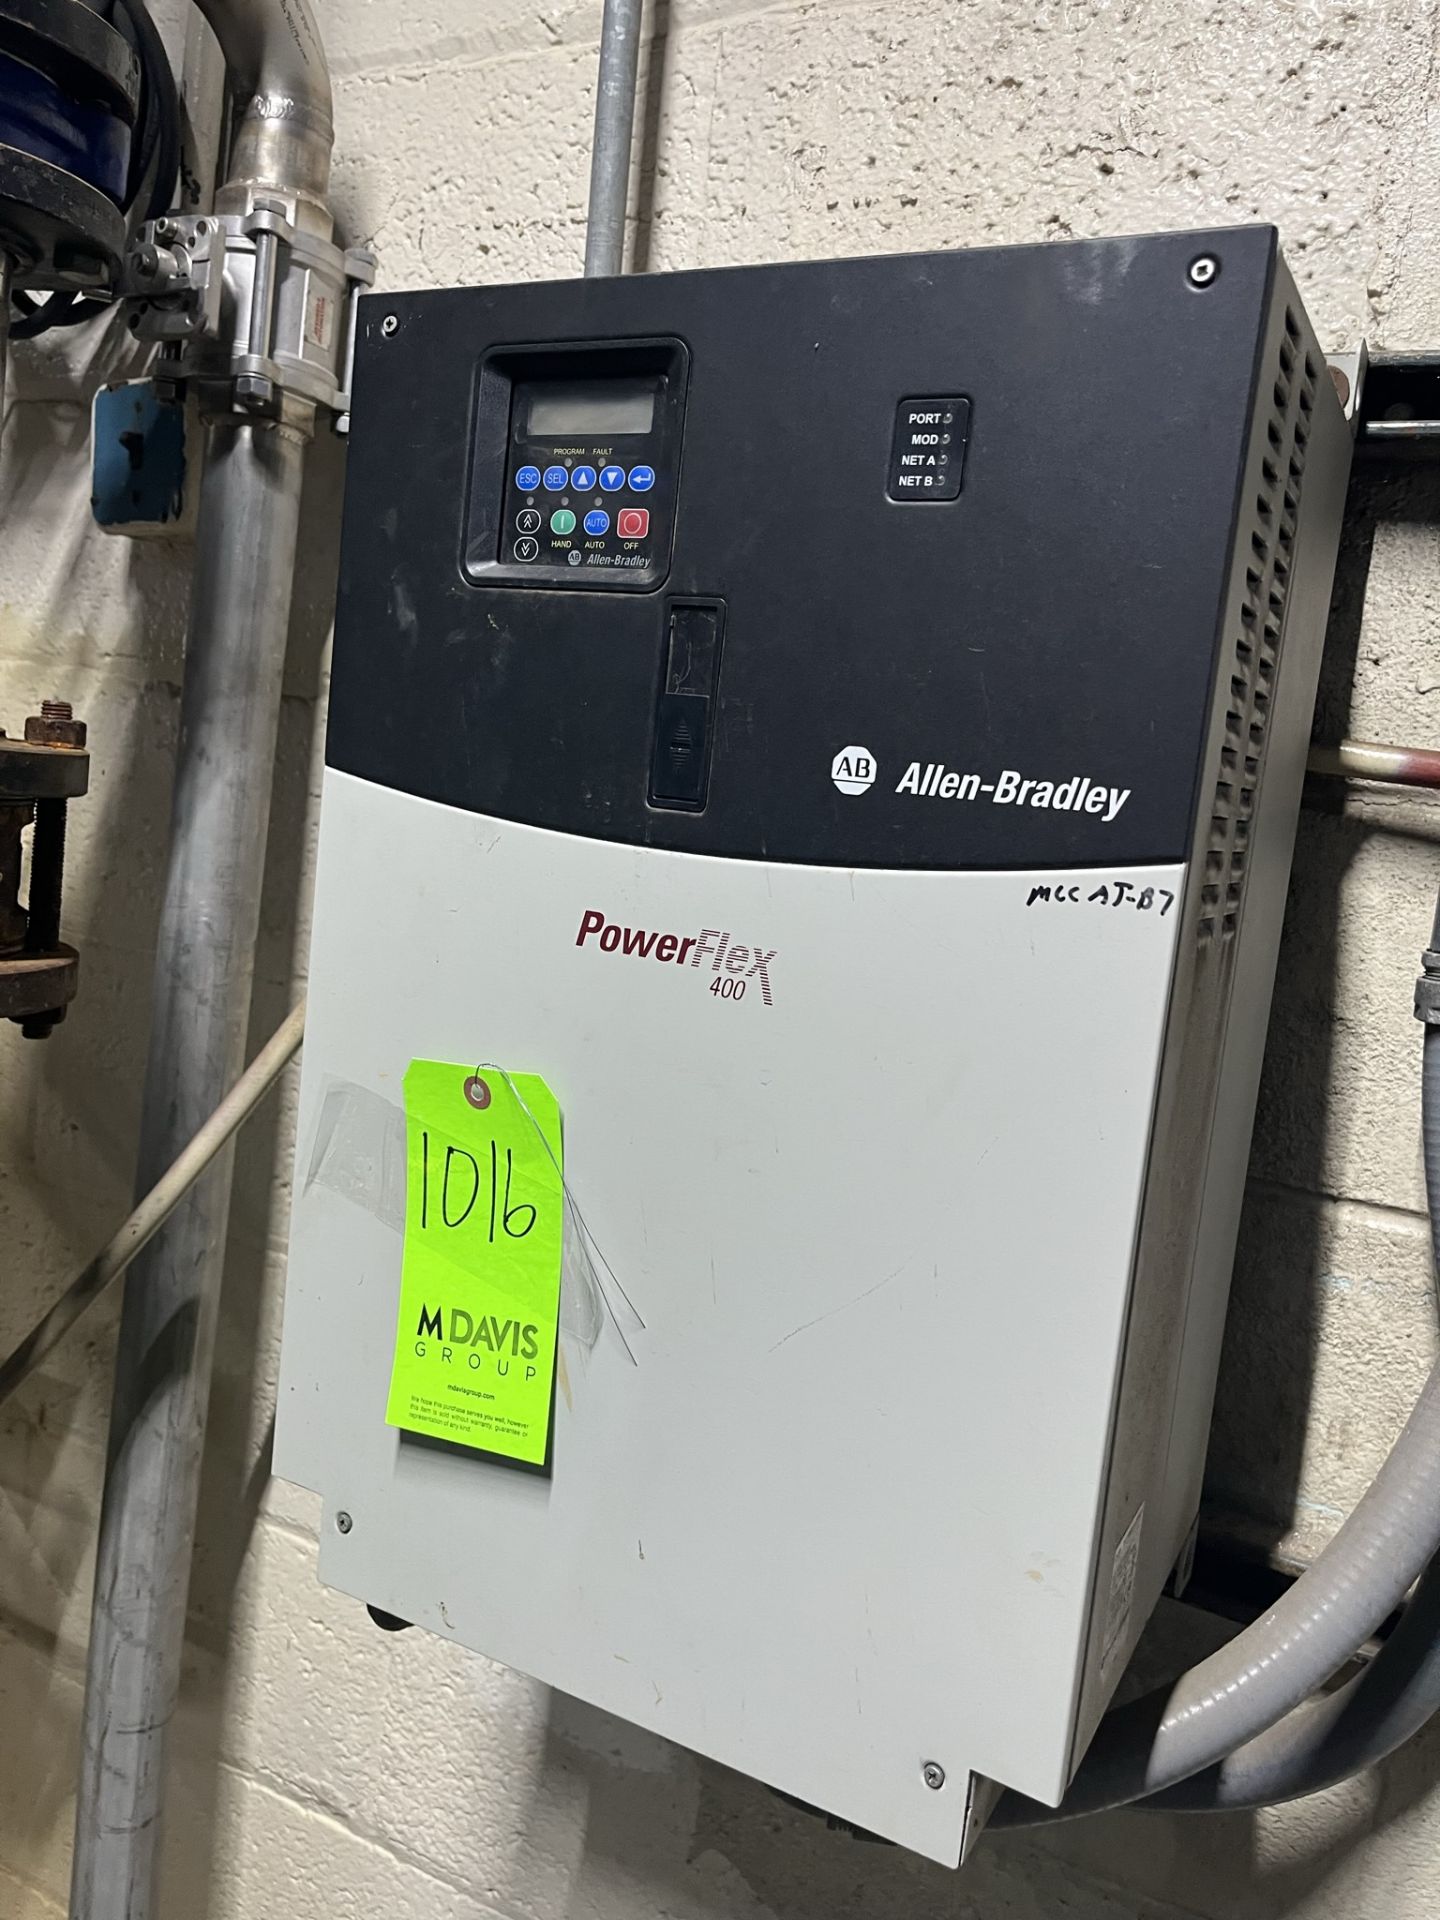 ALLEN BRADLEY POWER FLEX 400 CAT NO. 22C-D088A103 SERIES A MOTOR RATING: 45KW/60 HP INPUT 3 PHASE - Image 3 of 4